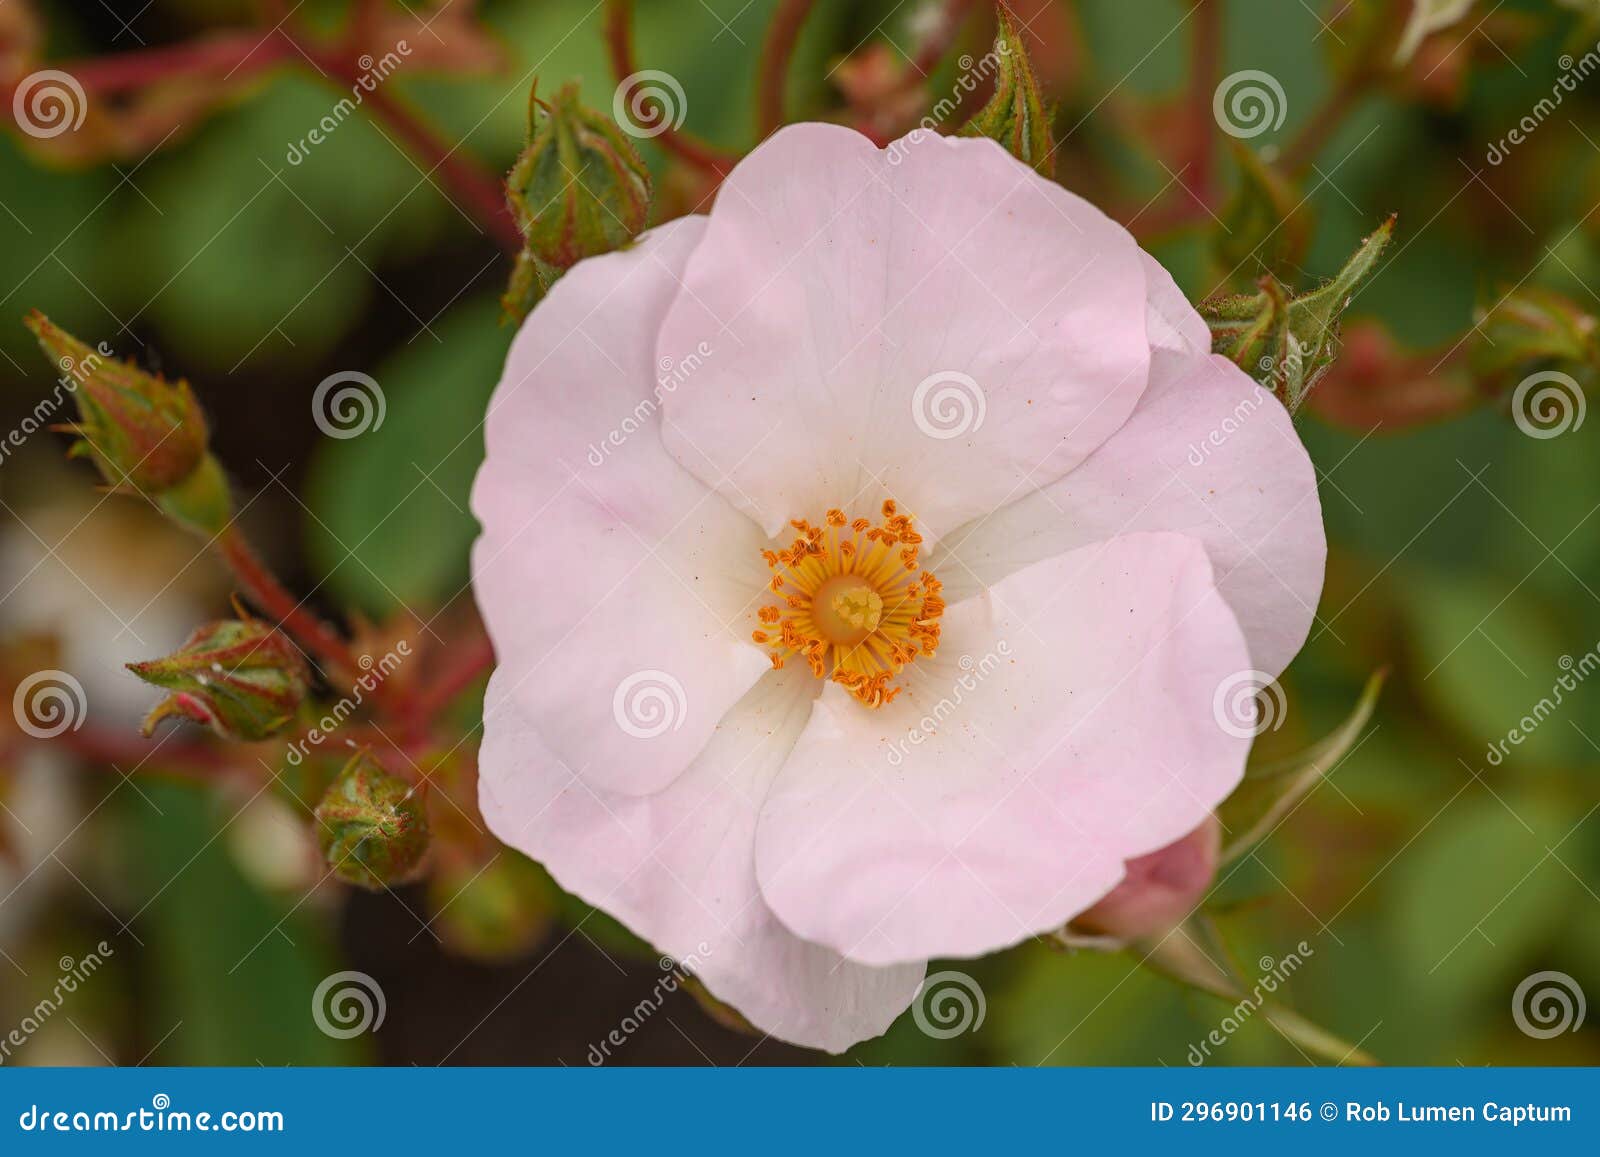 cluster rose rosa mira, a single pale pink flower